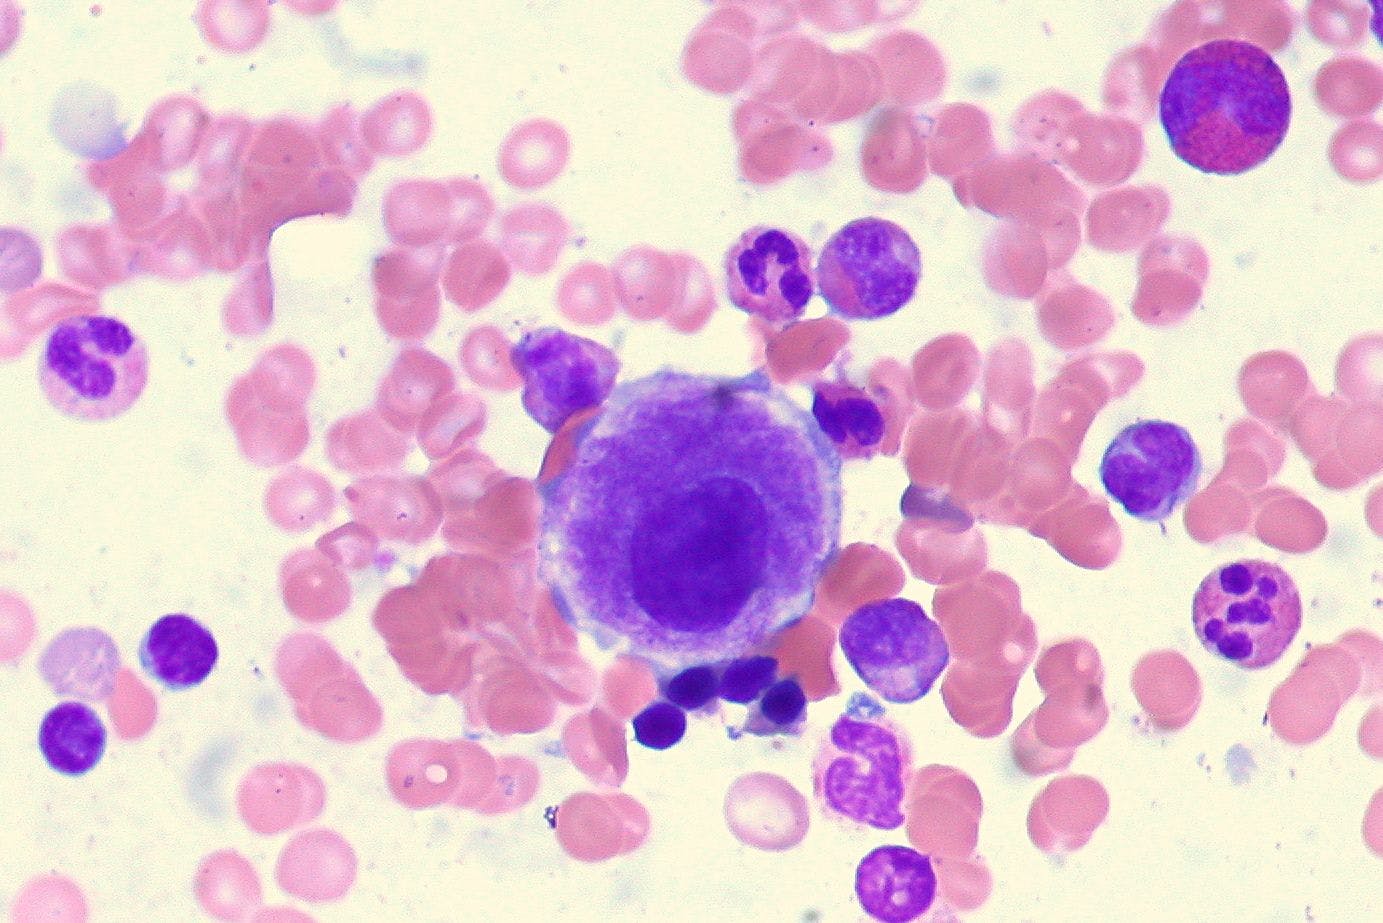 Safety data from the phase 3 COMMANDS trial were consistent with the overall safety profile of luspatercept for the treatment of anemia in patients with MDS who require red blood cell transfusions.